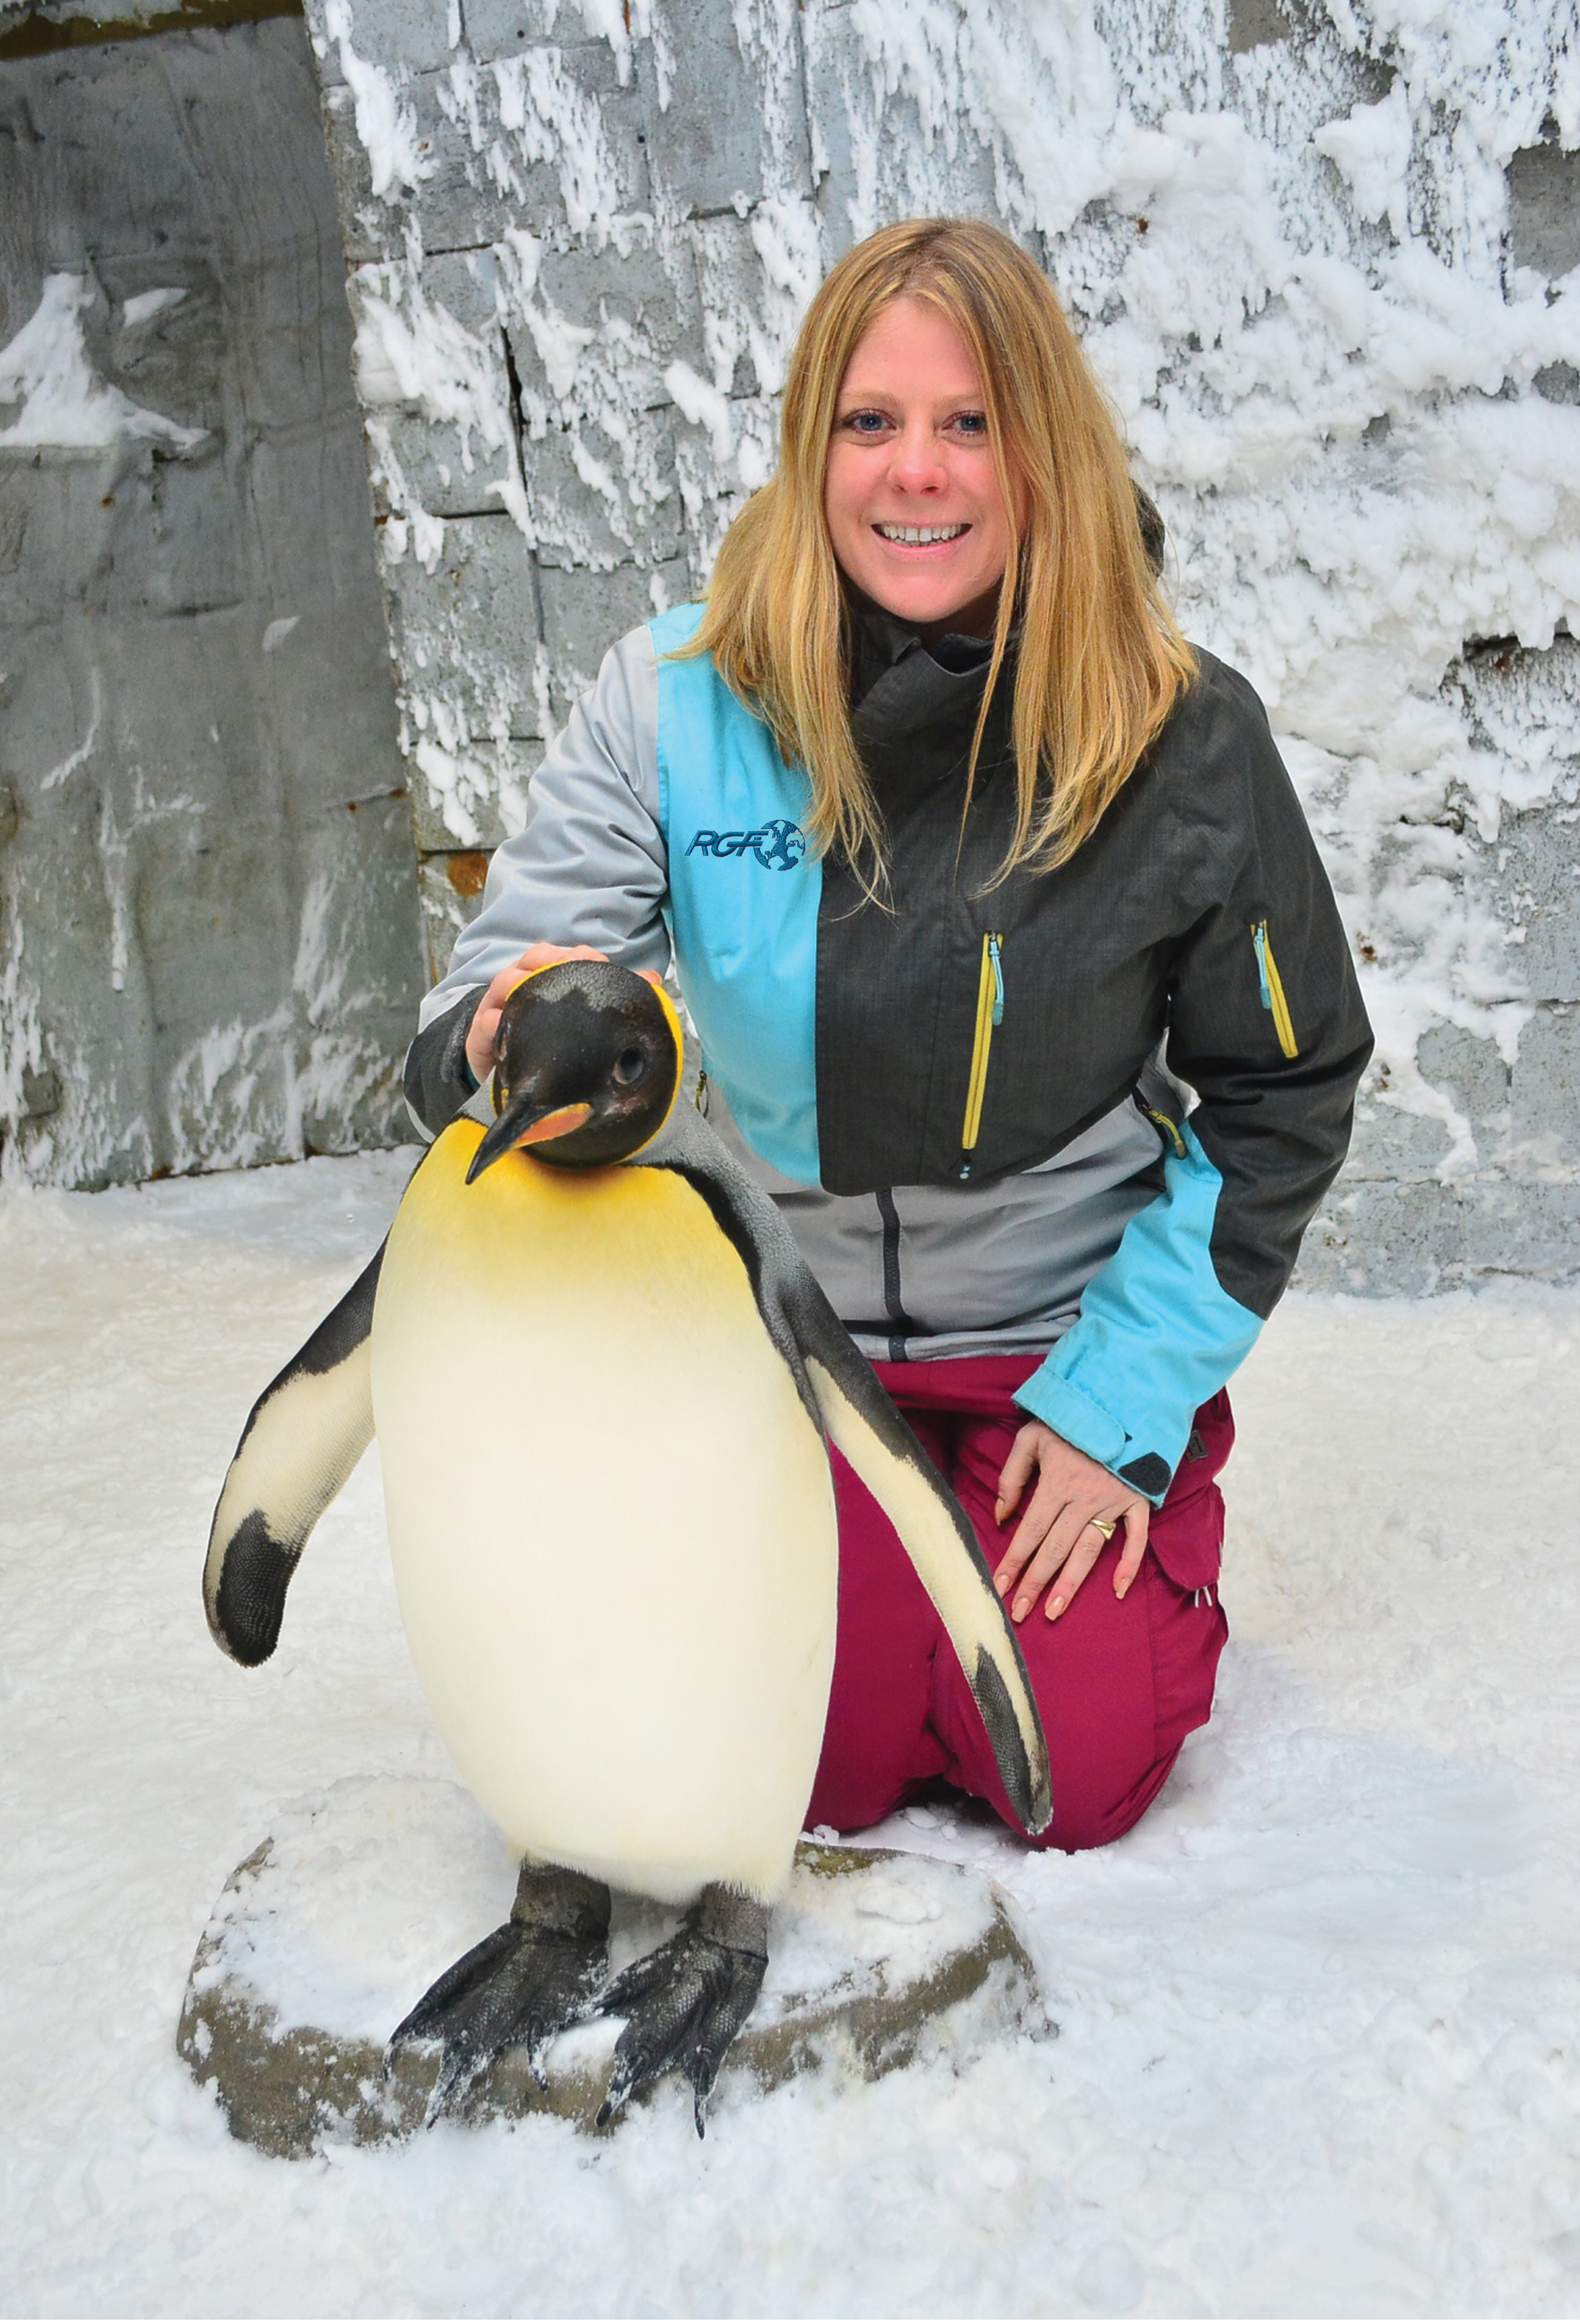 Astrid von Oetinger, RGF's International Sales Manager, makes a visit to see Lulu the King Penguin in Ski Dubai's Penguin Encounter